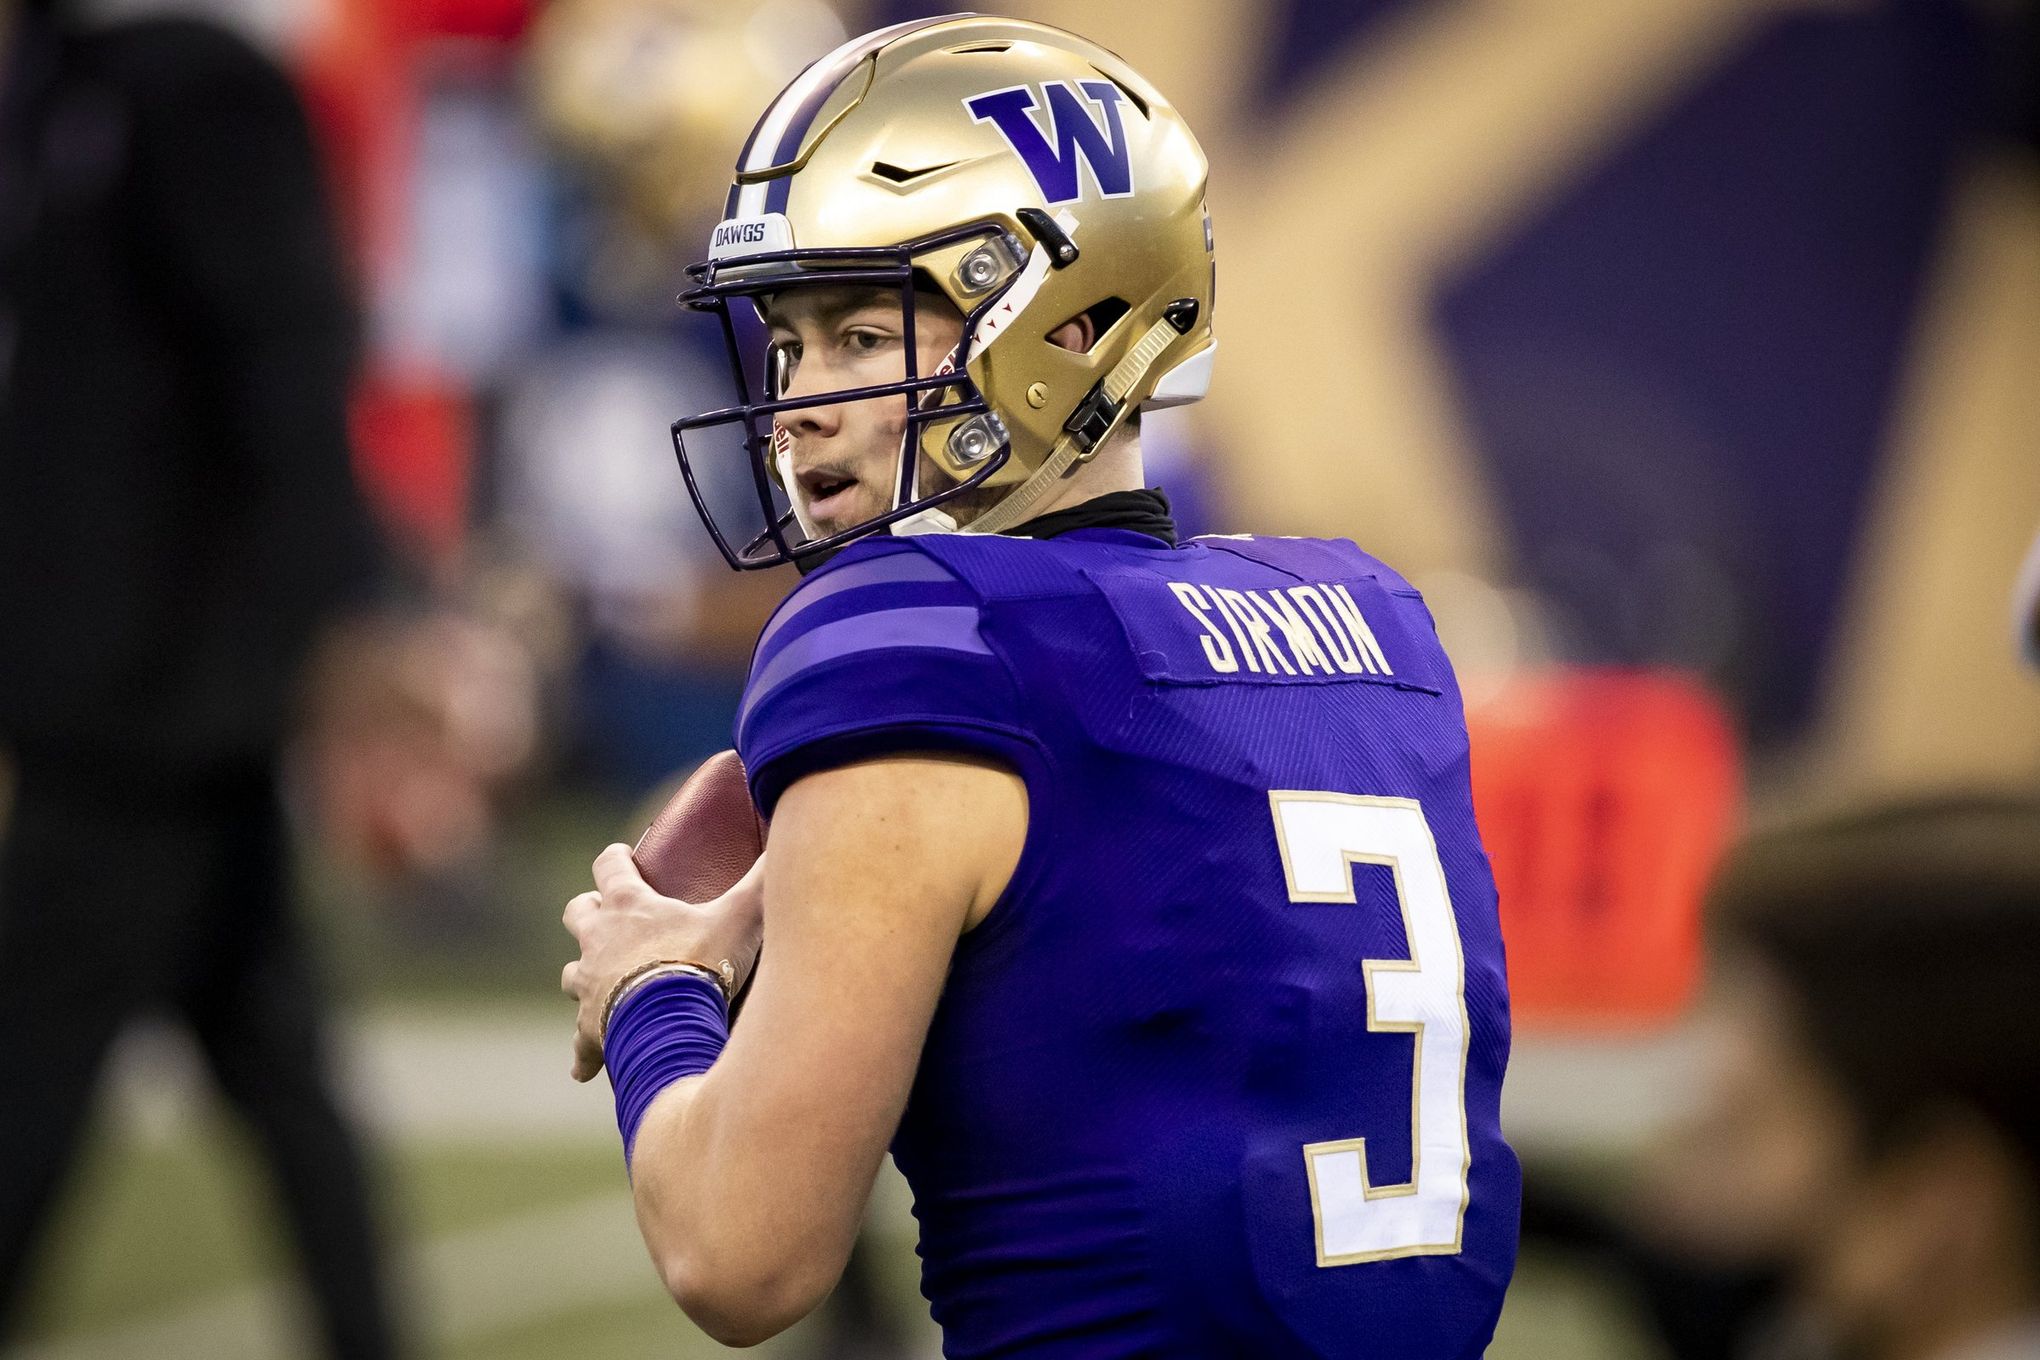 He's leaving on great terms and with a clear heart': UW QB Jacob Sirmon  enters transfer portal | The Seattle Times